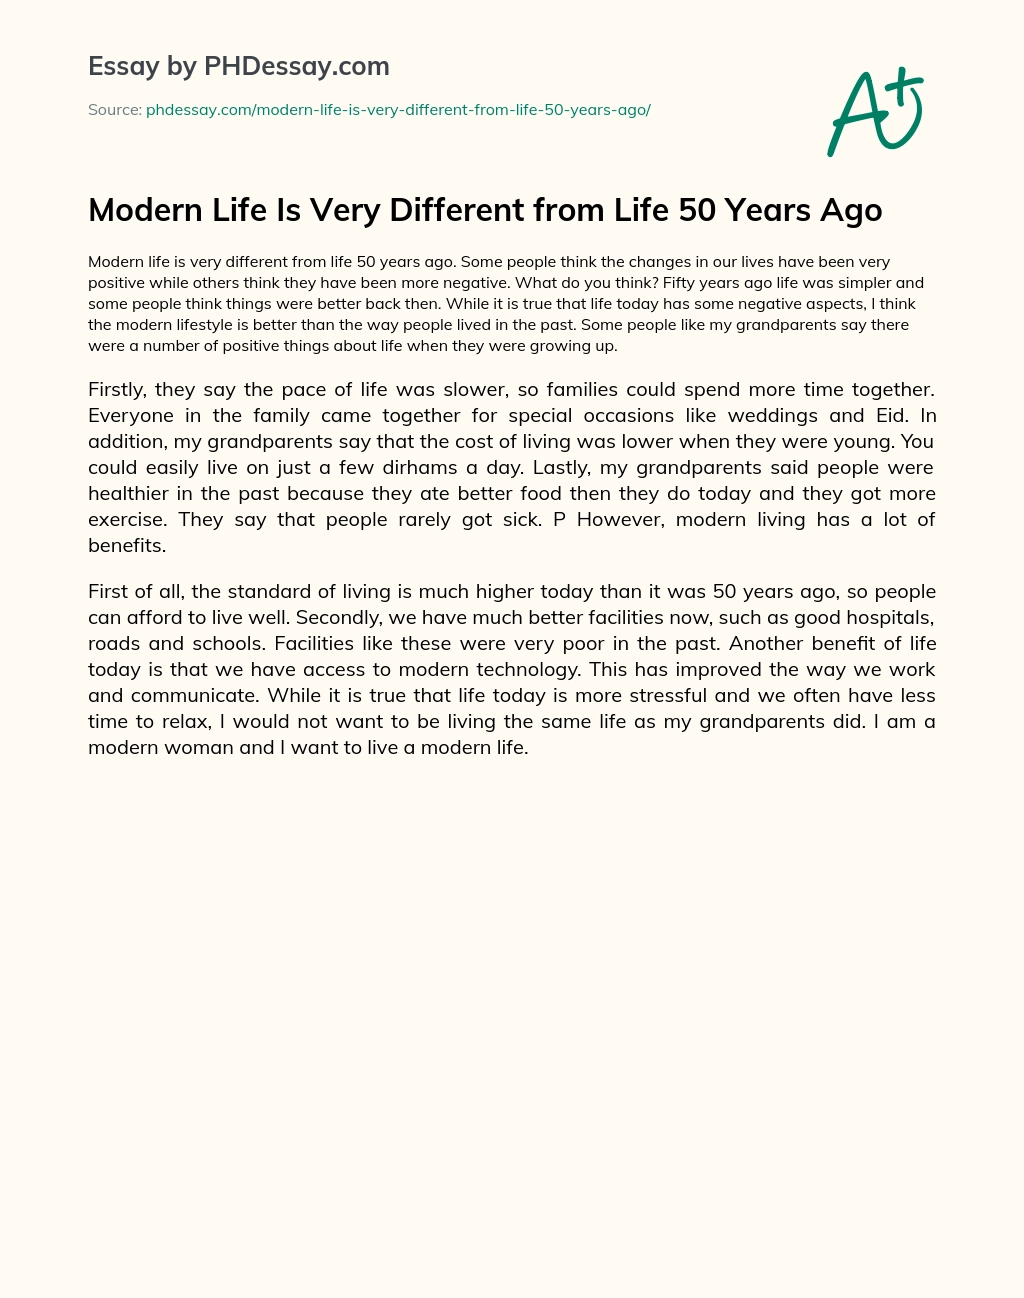 Modern Life Is Very Different from Life 50 Years Ago essay